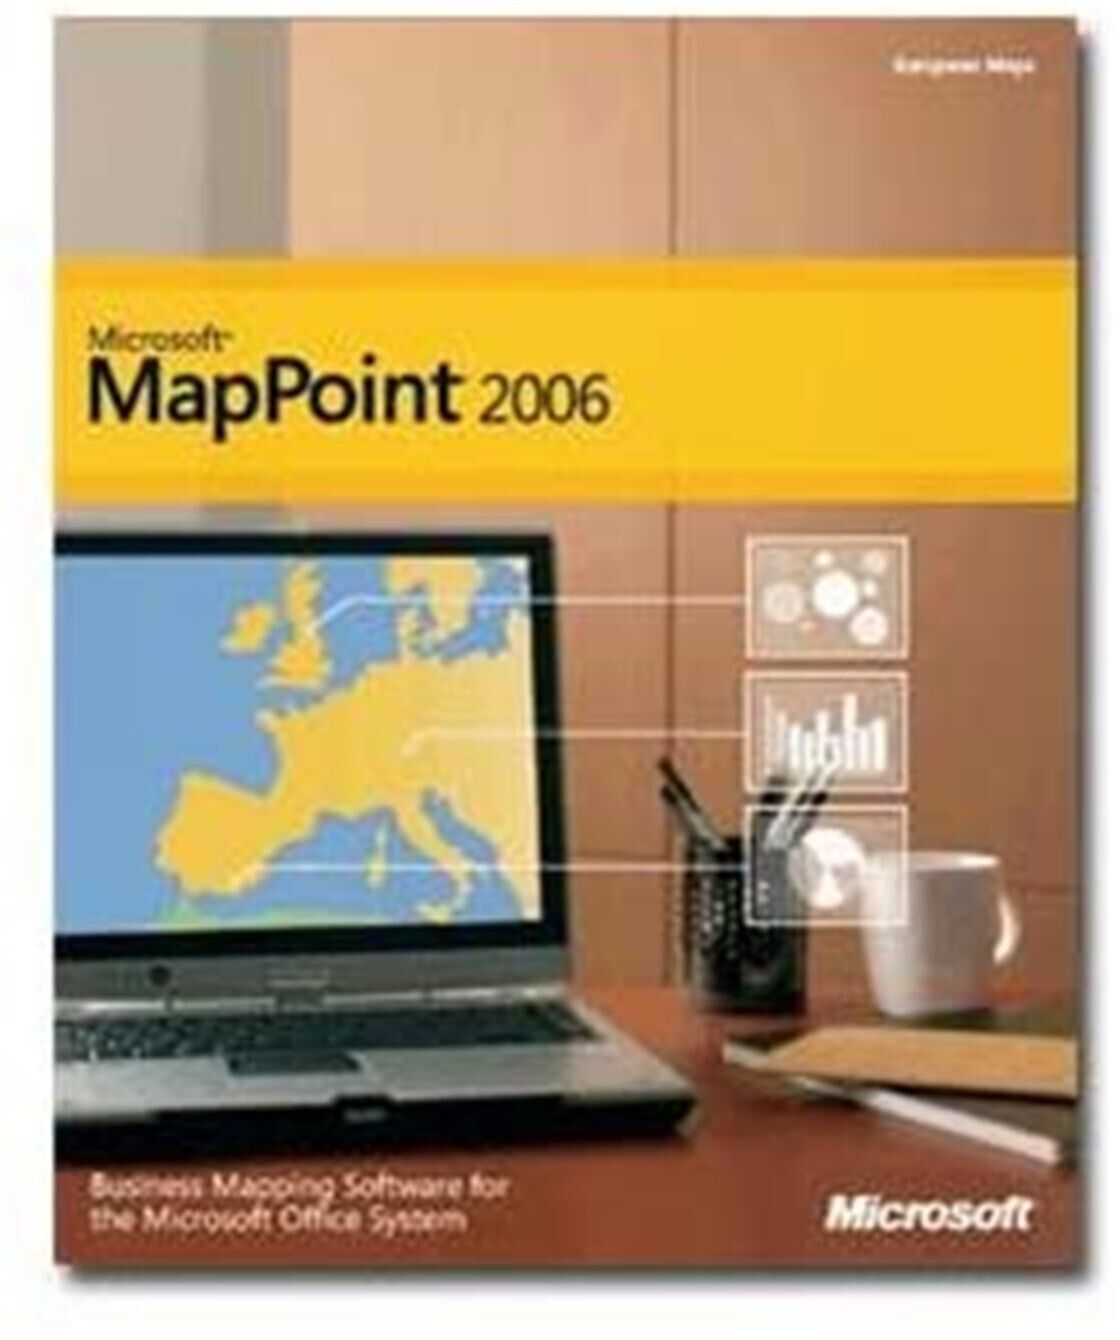 Microsoft MapPoint 2006 Full Version w/ 10 Licenses